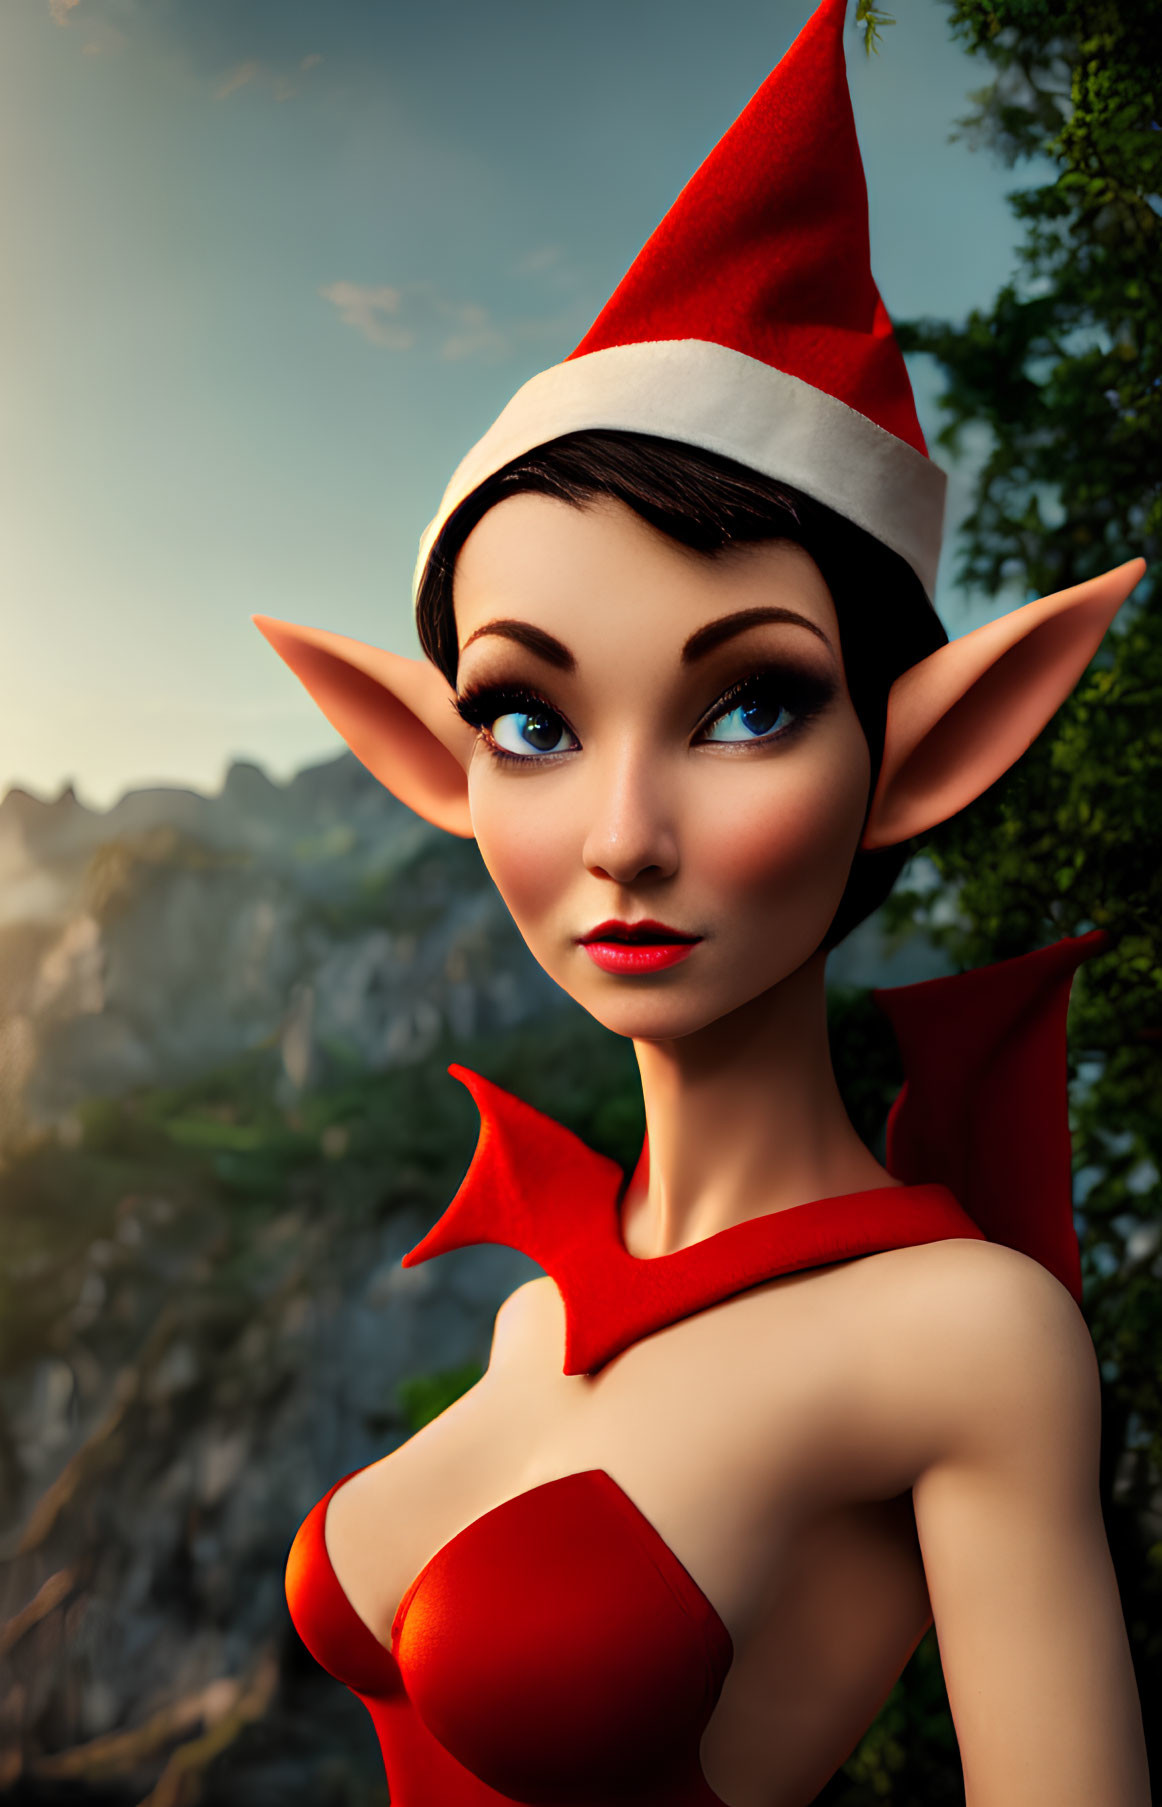 Female Elf with Large Pointed Ears and Red Hat in Mountain Setting